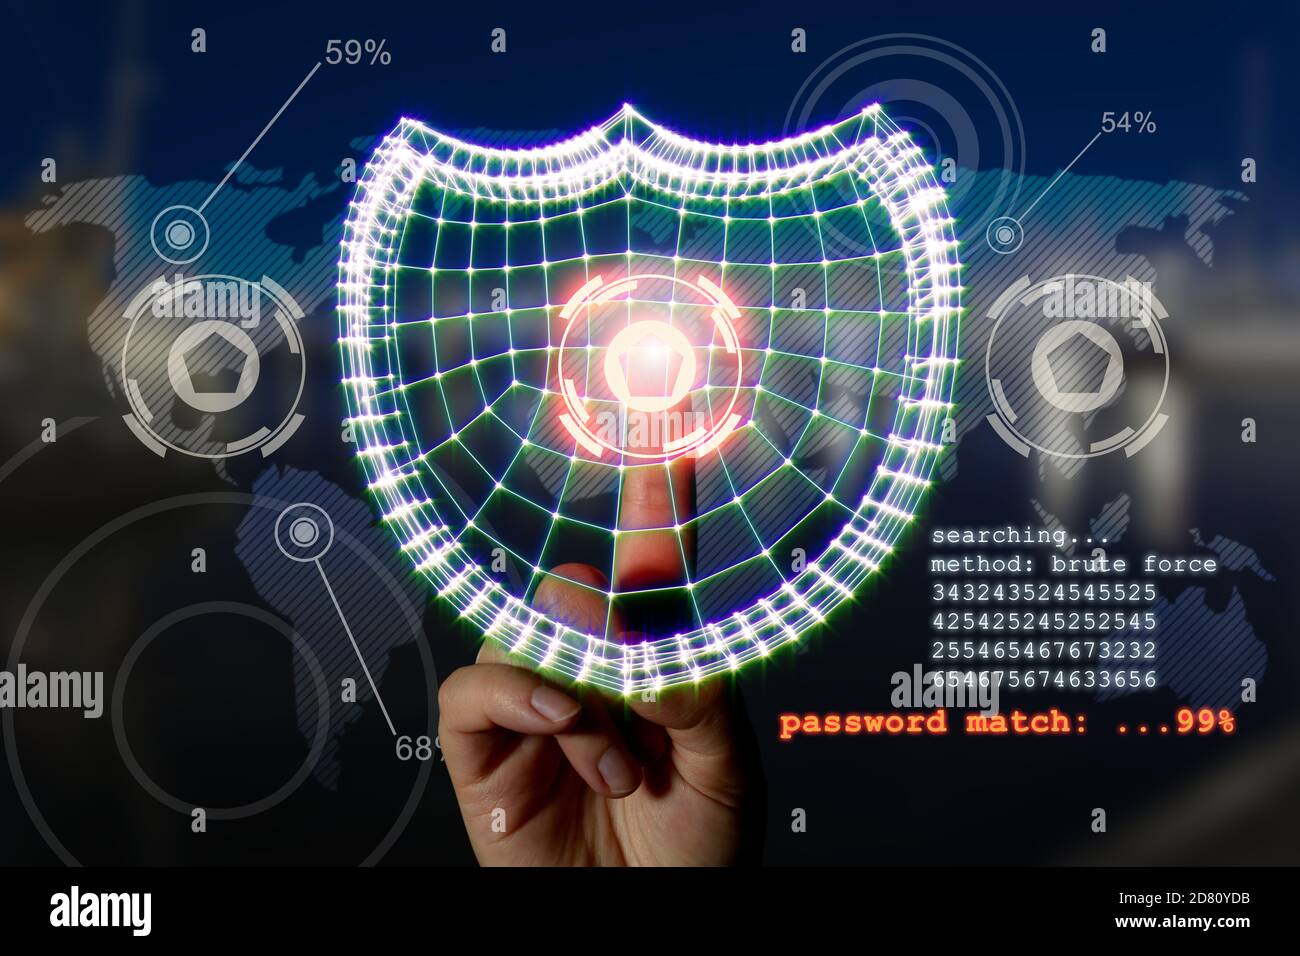 Computer security concept. Hand and shield symbolizing data protection in the network and personal computers. Mixed media. Stock Photo